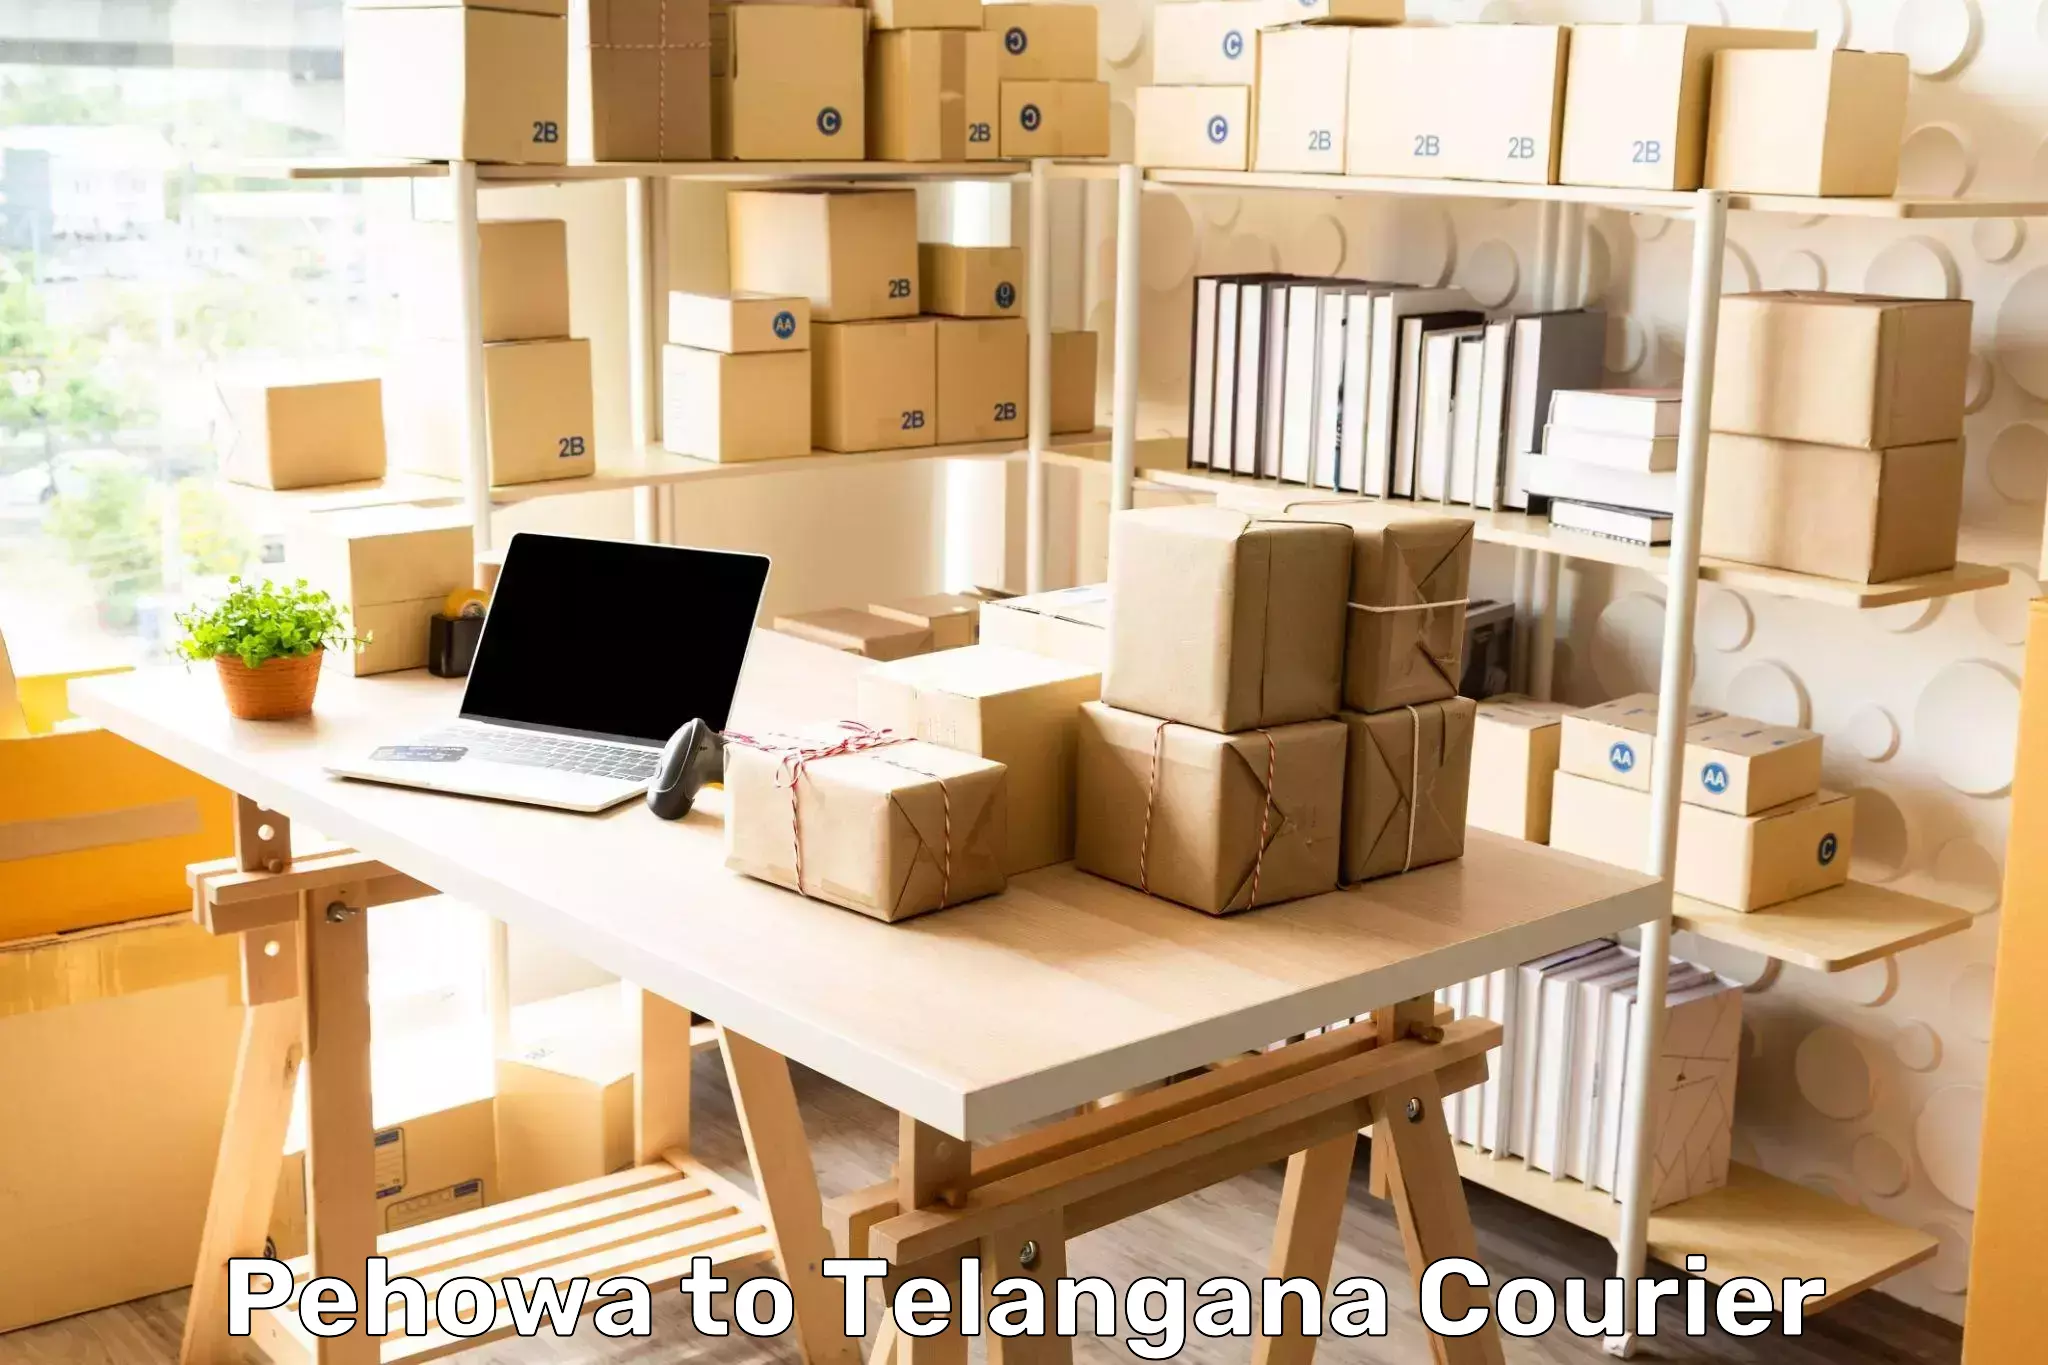 Courier rate comparison Pehowa to Kamalapur